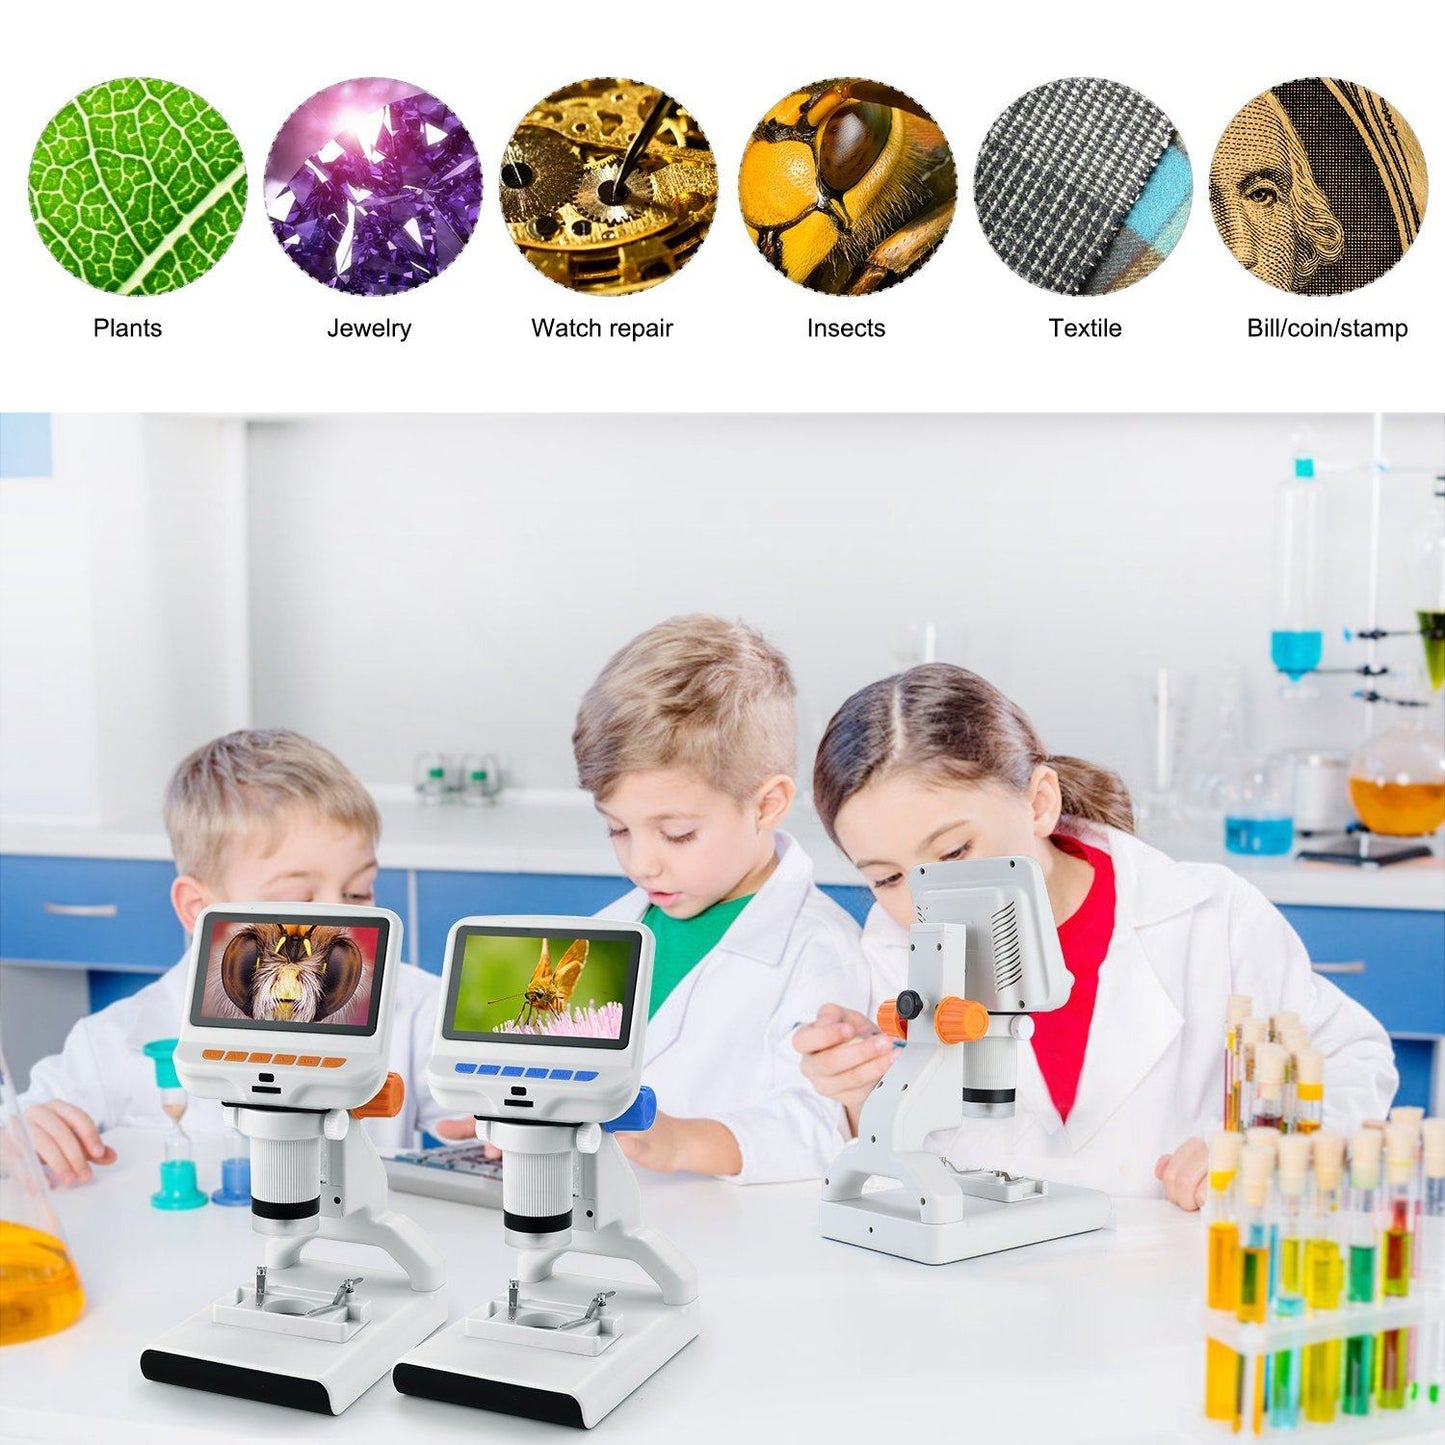 Andonstar AD102 Kids' USB Digital Microscope With Plastic Stand for Plant Observation